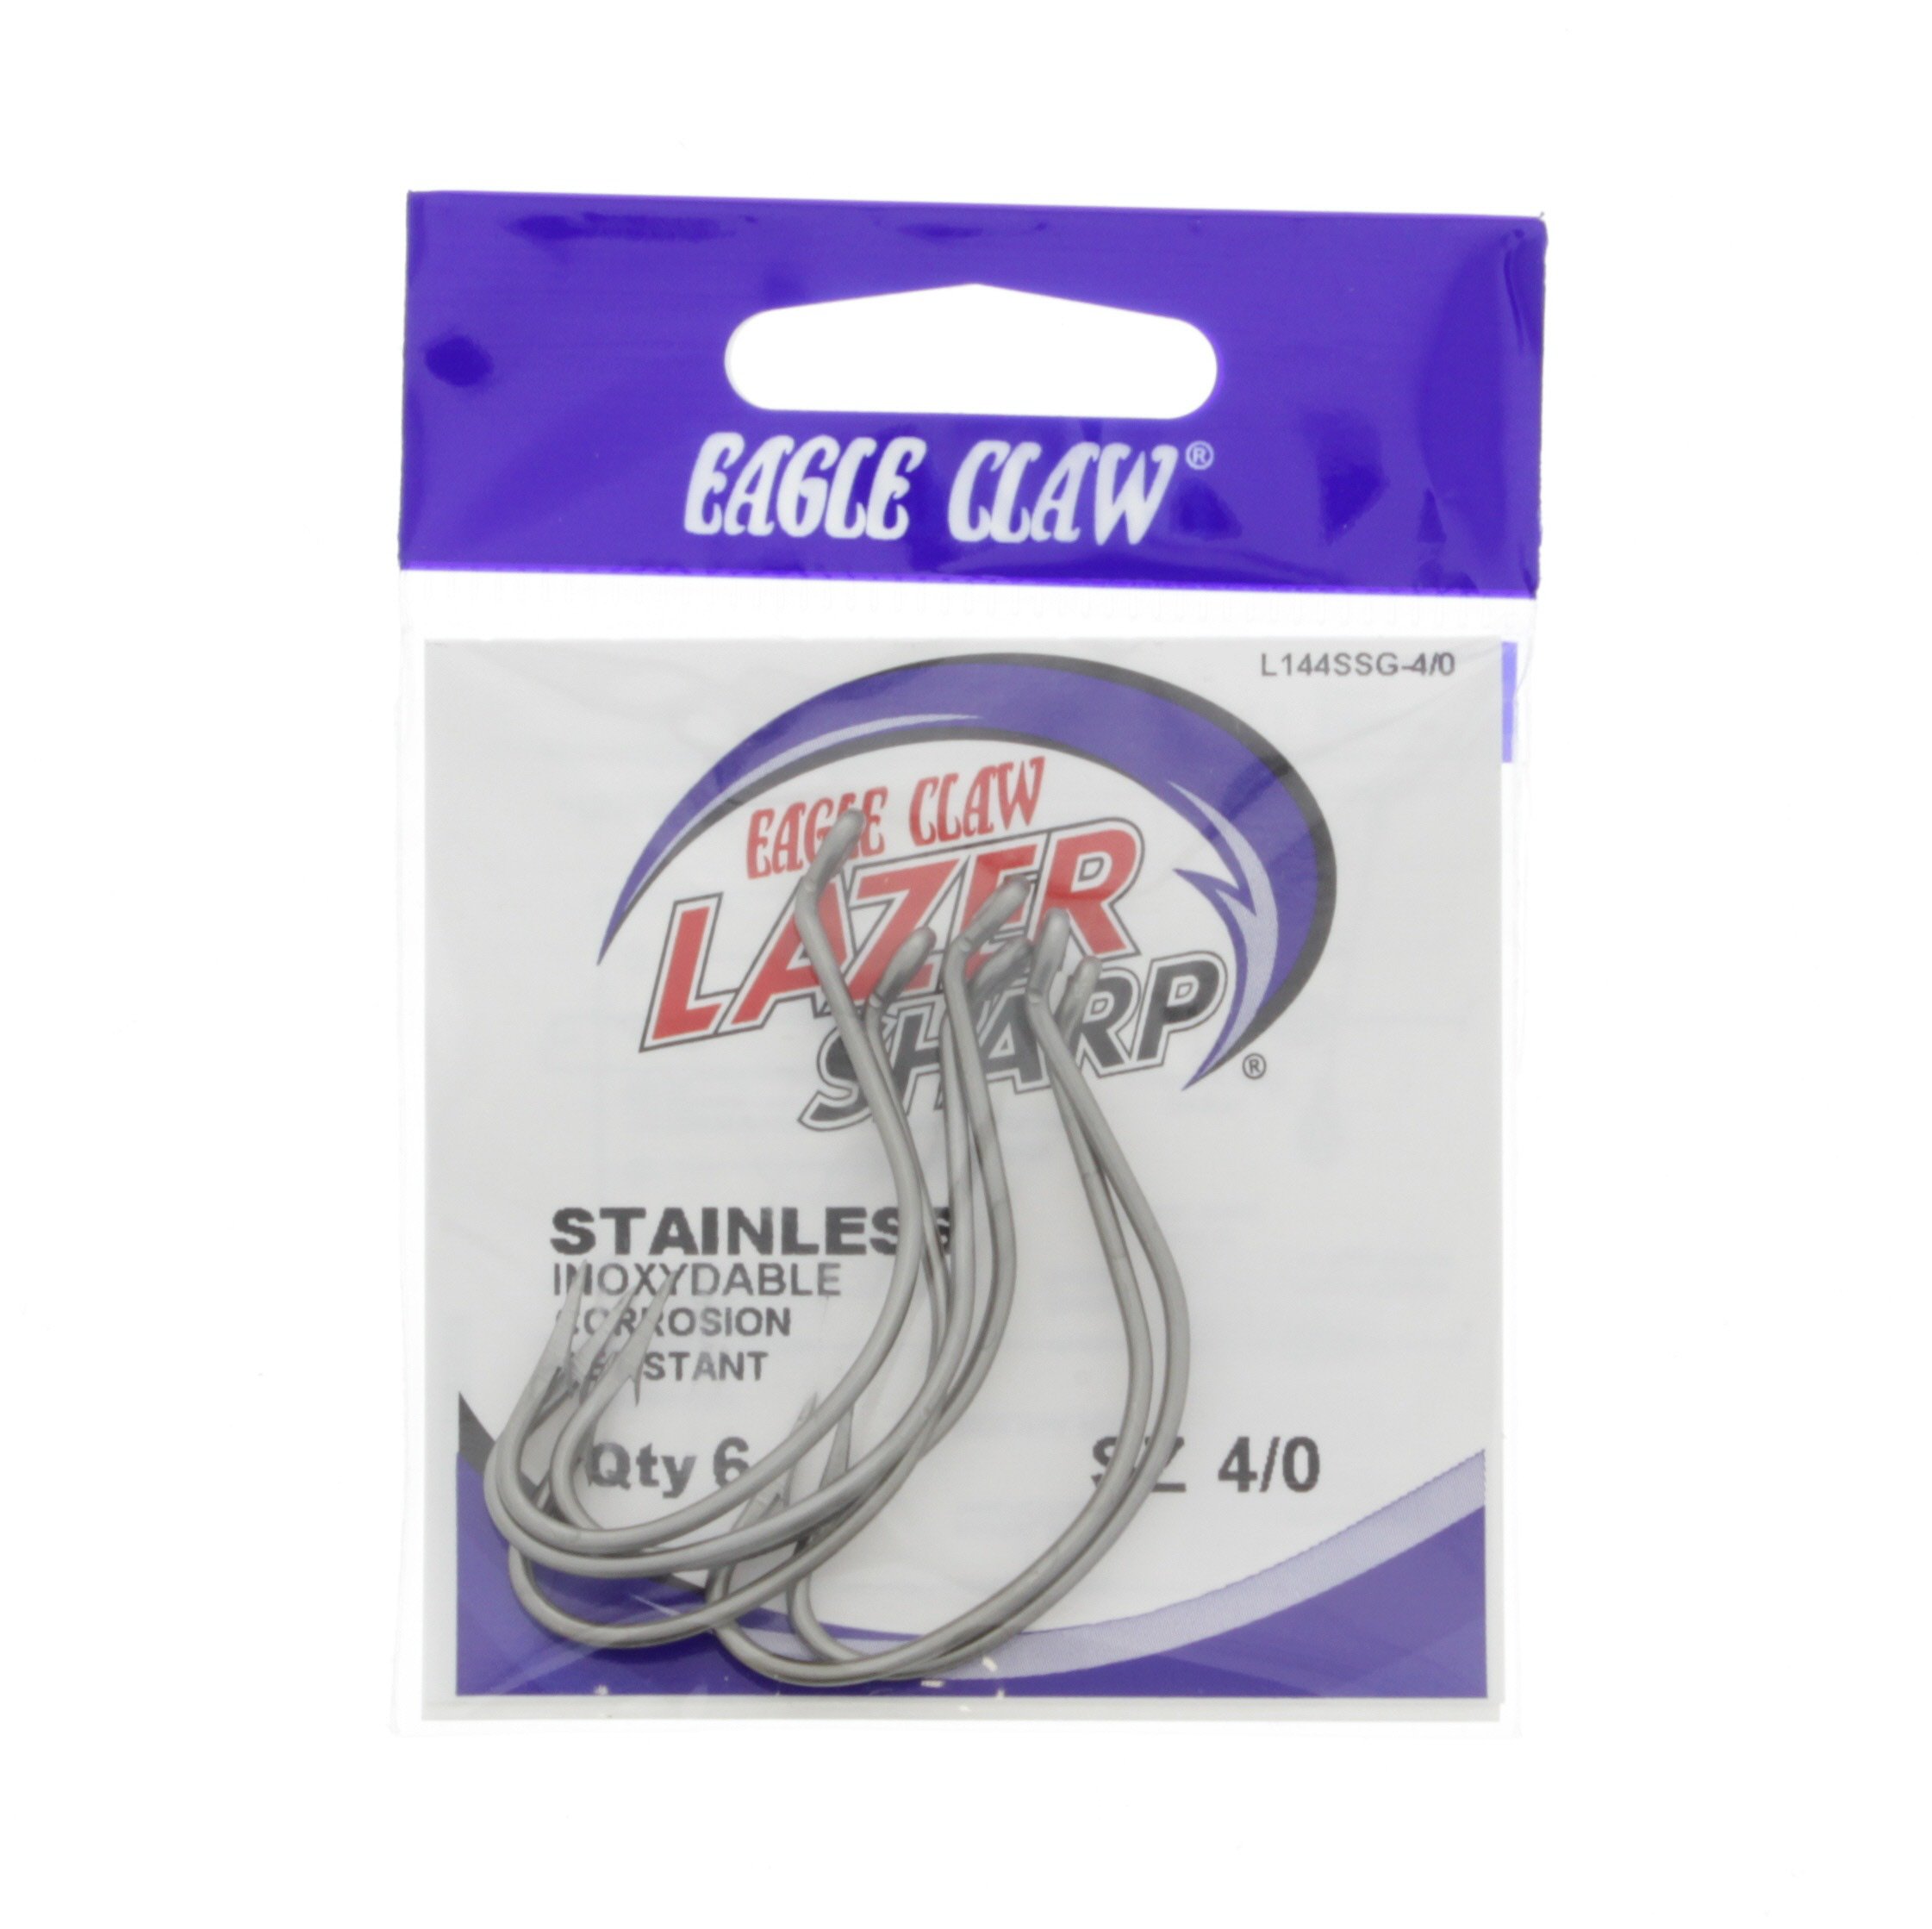 Eagle Claw Lazer Sharp Stainless Hook, Size 4/0